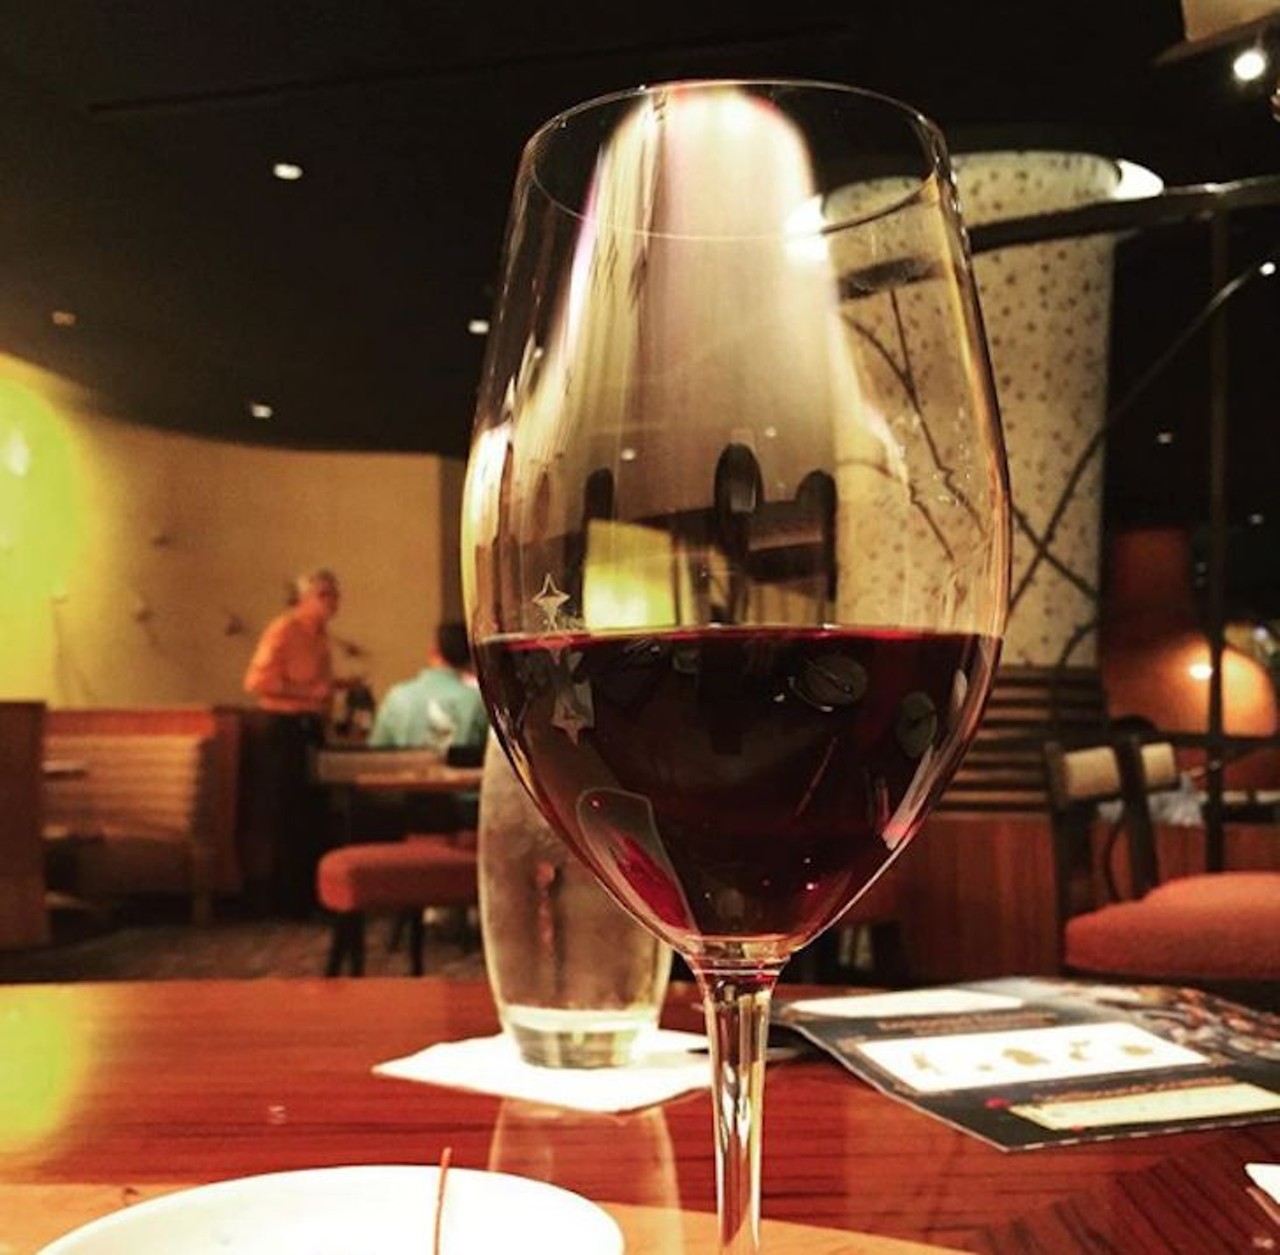 Jiko &#150; The Cooking Place  
2901 Osceola Parkway, 407-938-4733
Blending African, Indian and Mediterranean together in their dishes, Jiko in the Animal Kingdom Lodge at Disney not only offers food, but experiences like wine tasting or a post-dinner safari.
Photo via anchan_lee/ Instagram